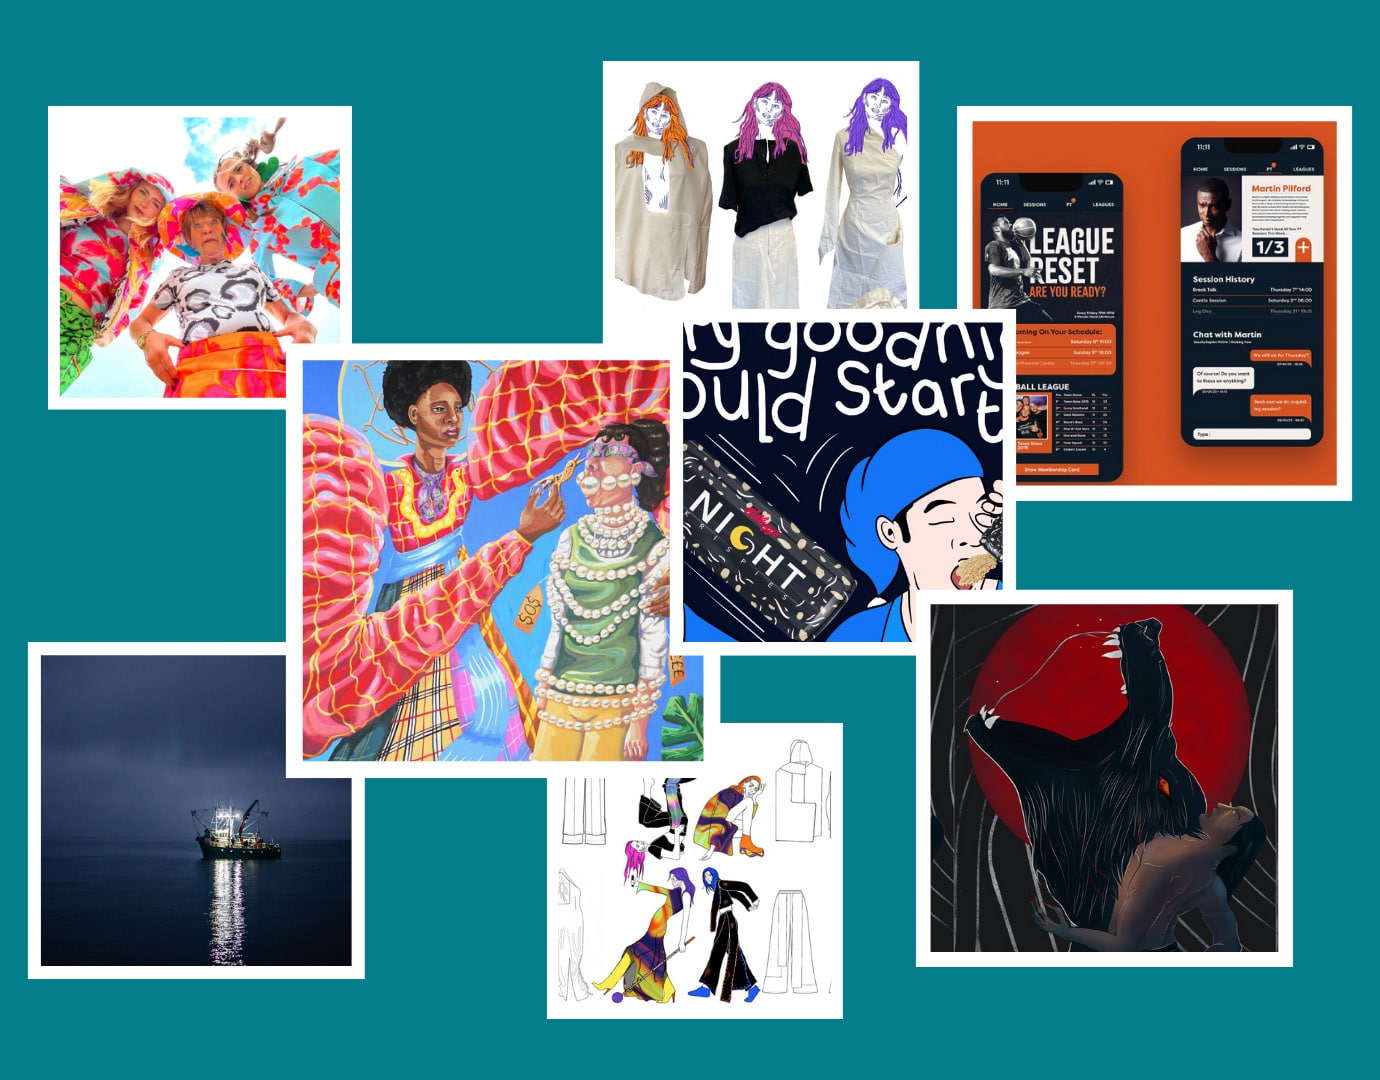 Collage of illustrations, fashion concept art, app adverts, and photography.